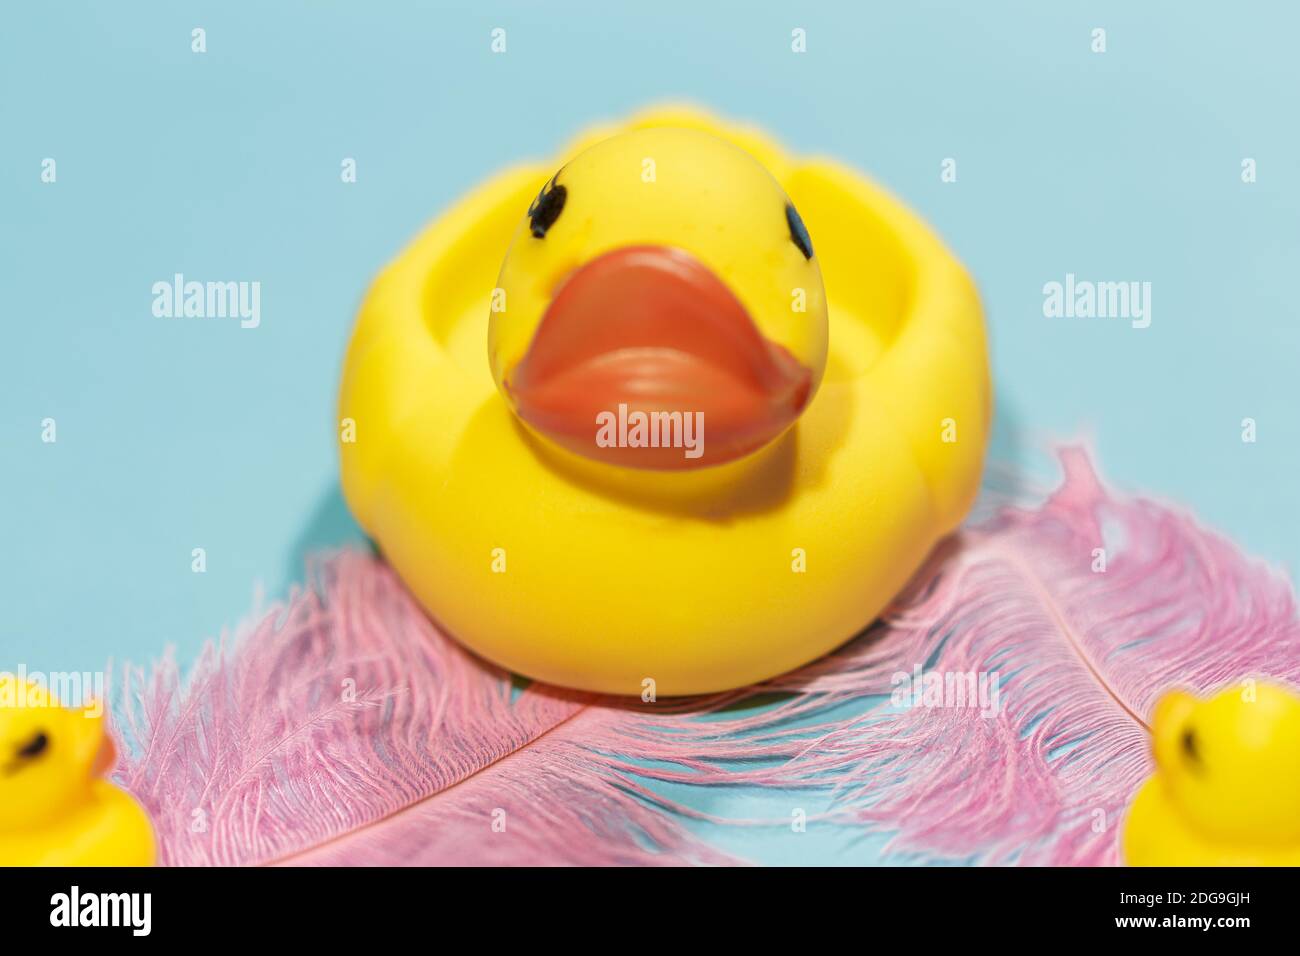 Yellow rubber duck on two soft pink feathers on a blue background Stock Photo